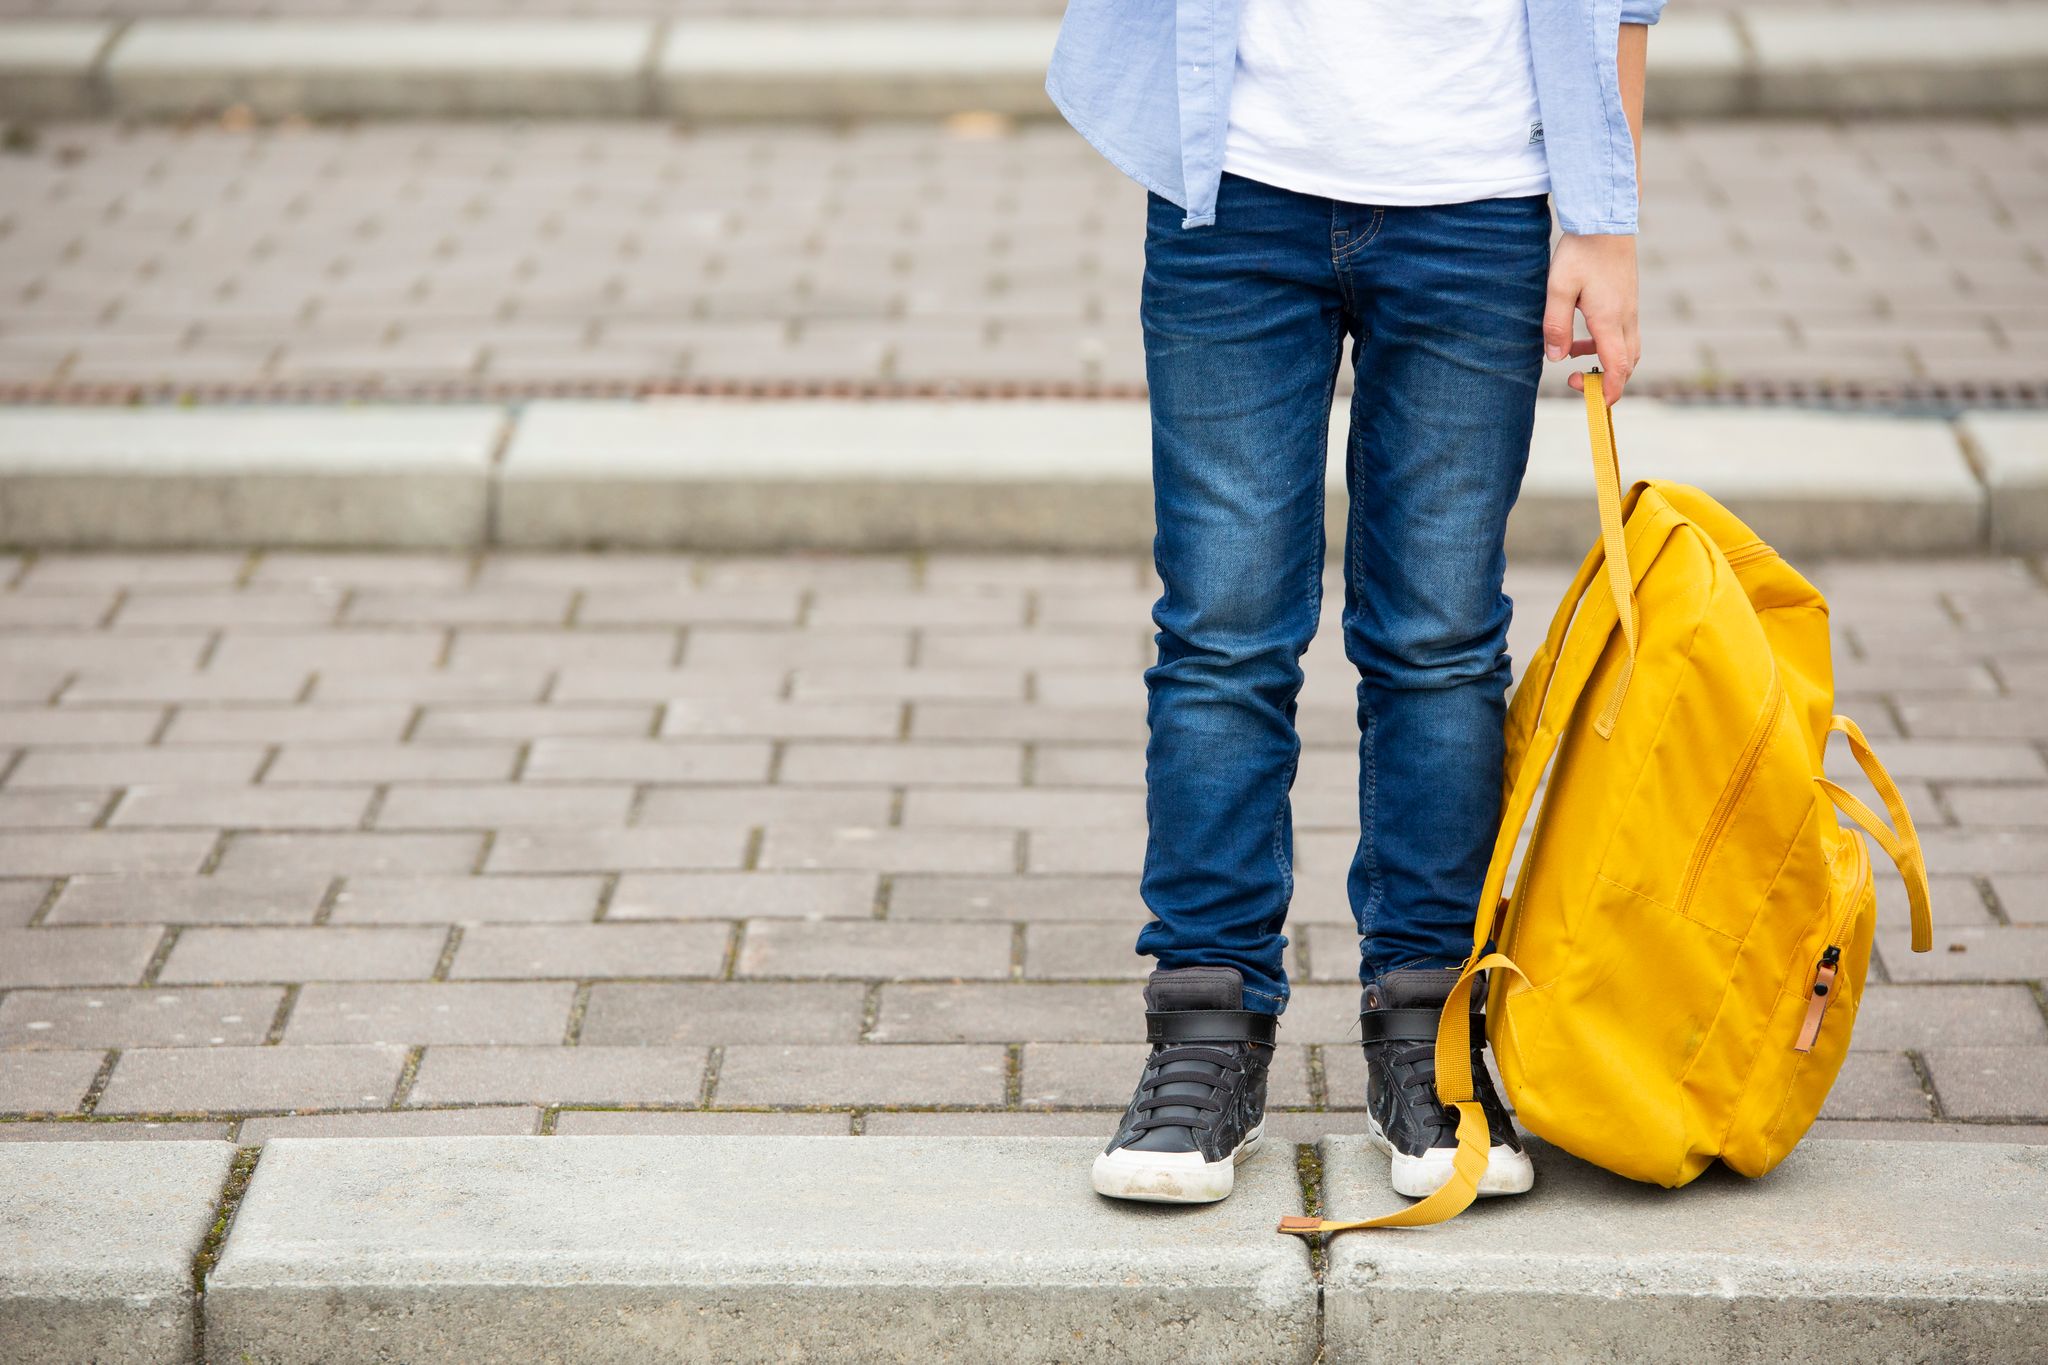 A person with a yellow bag, about to cross the street. | Source: Getty Images